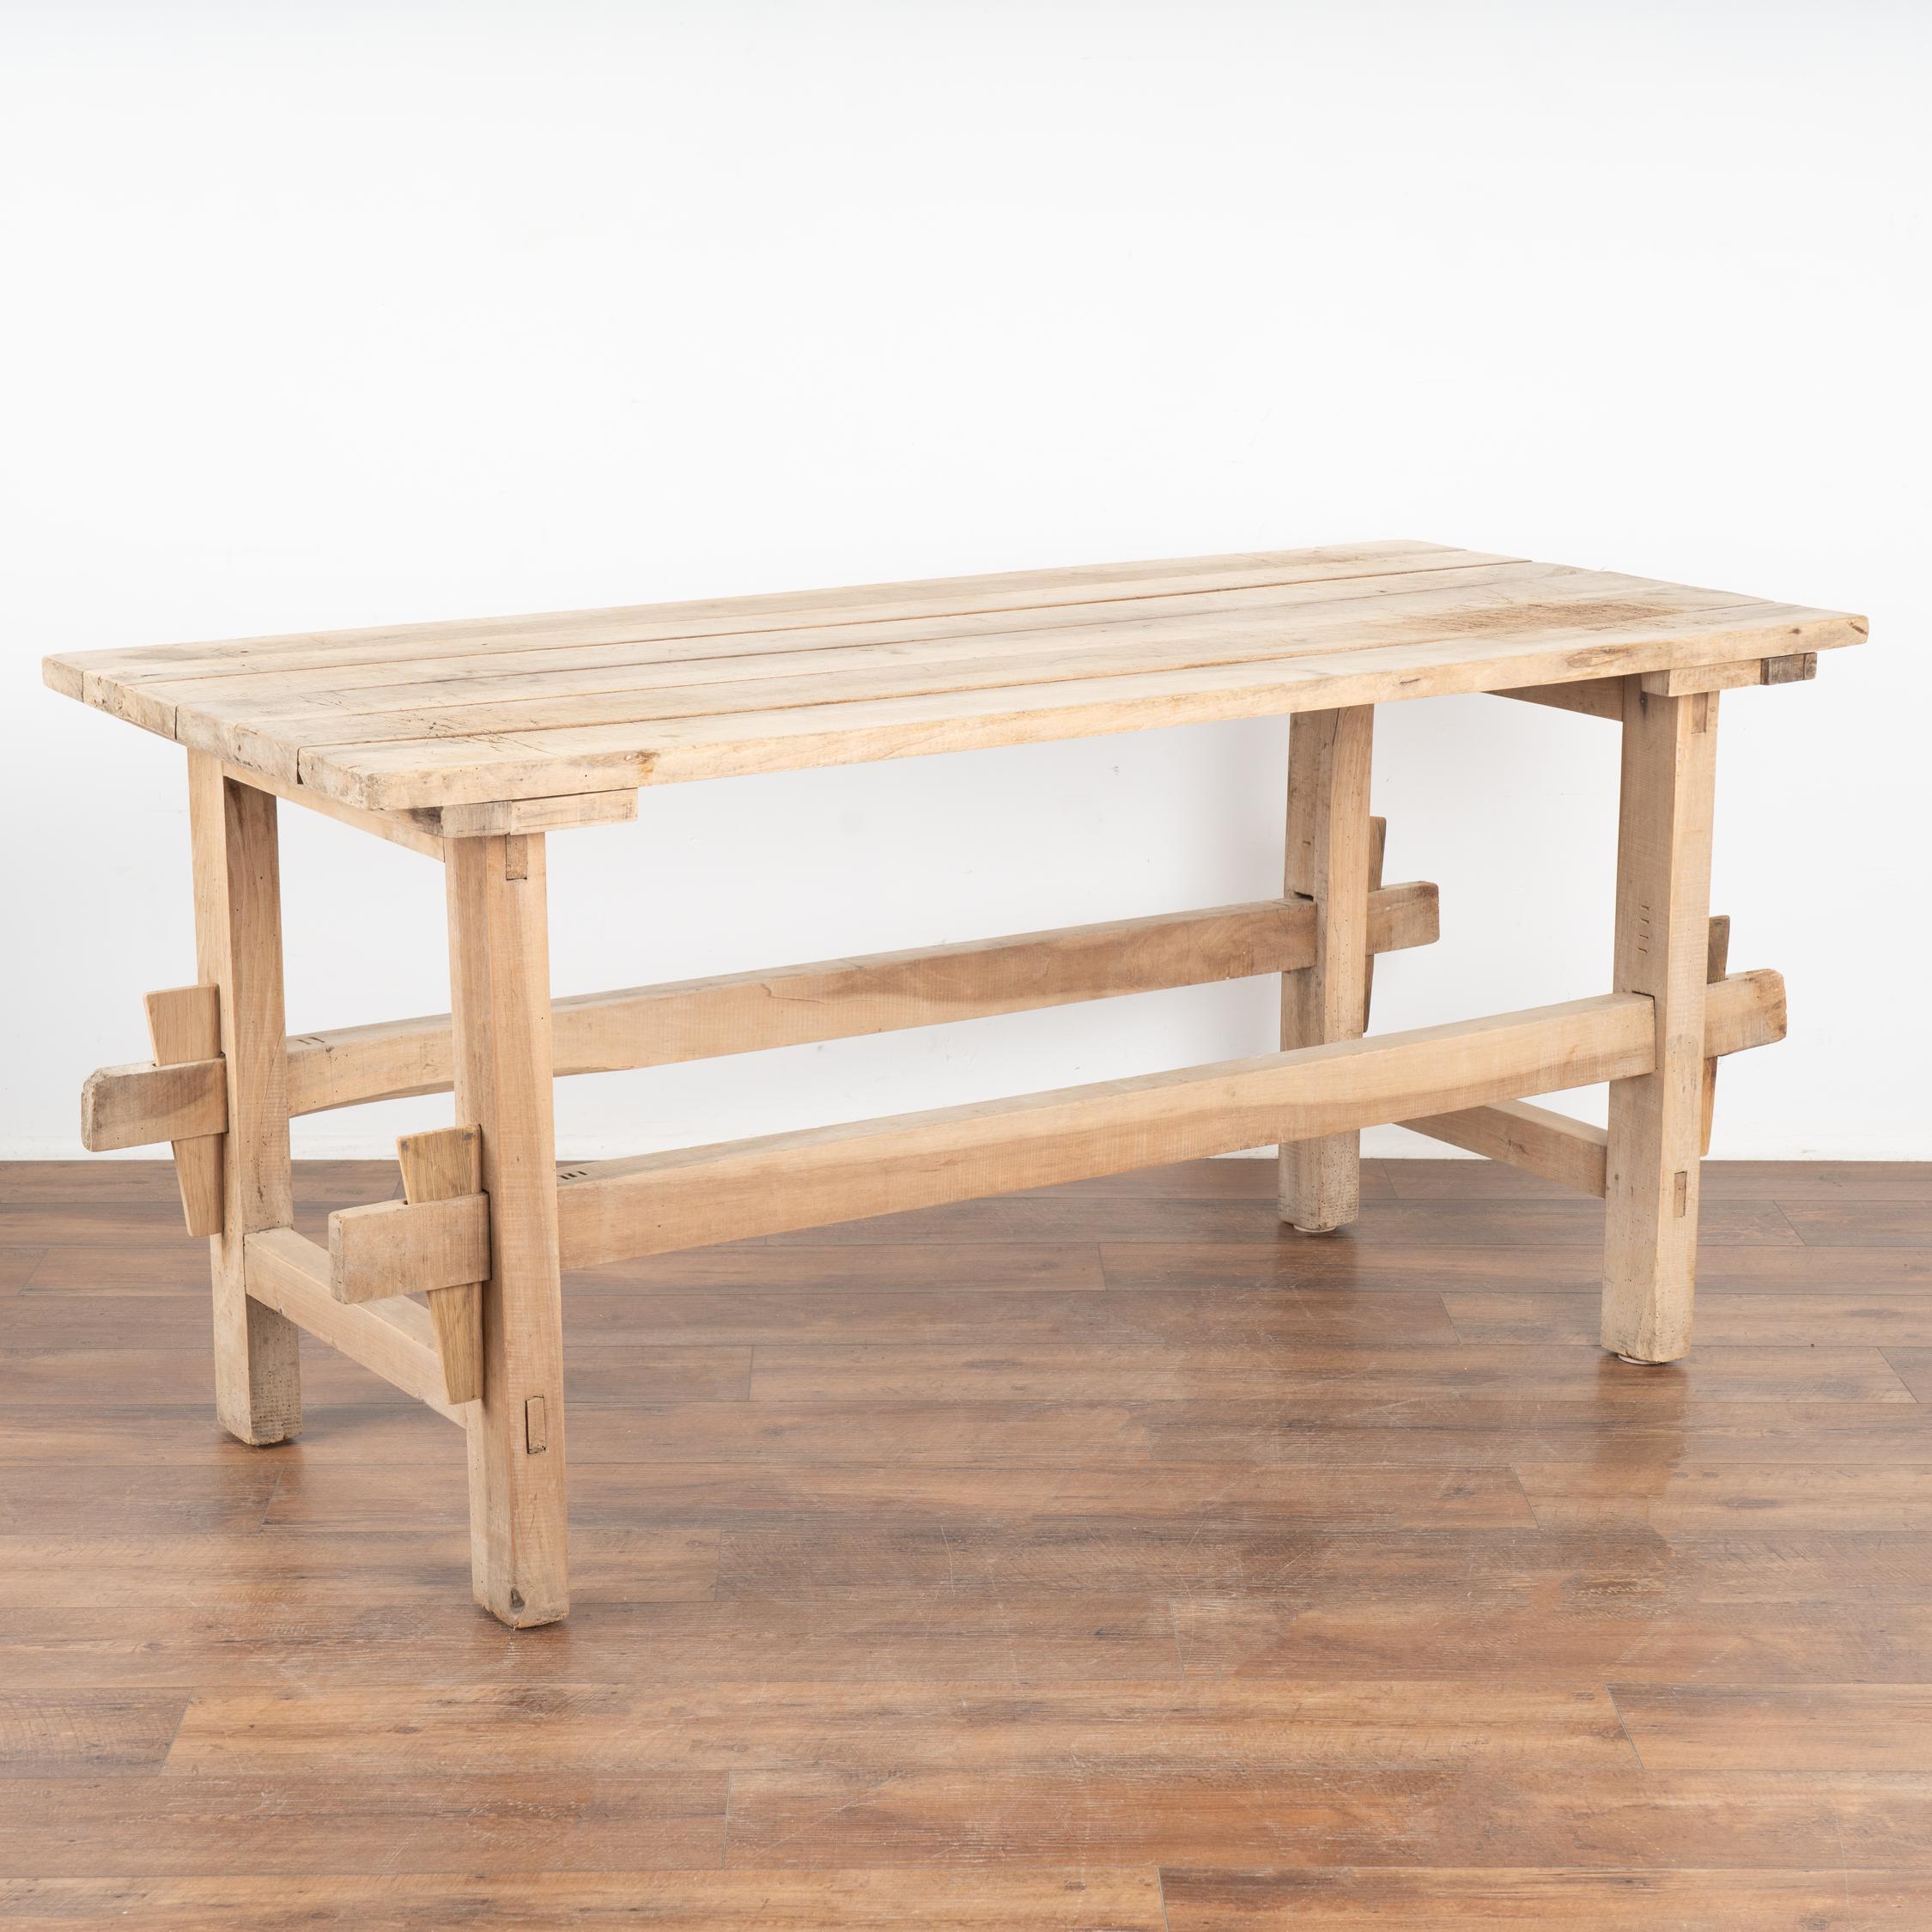 This wonderful old farm table from the Swedish countryside will serve well as a rustic table in today's modern home.
This trestle table originally served as a  work table. Look at photos of the top to appreciate the many deep gouges, scrapes, nicks